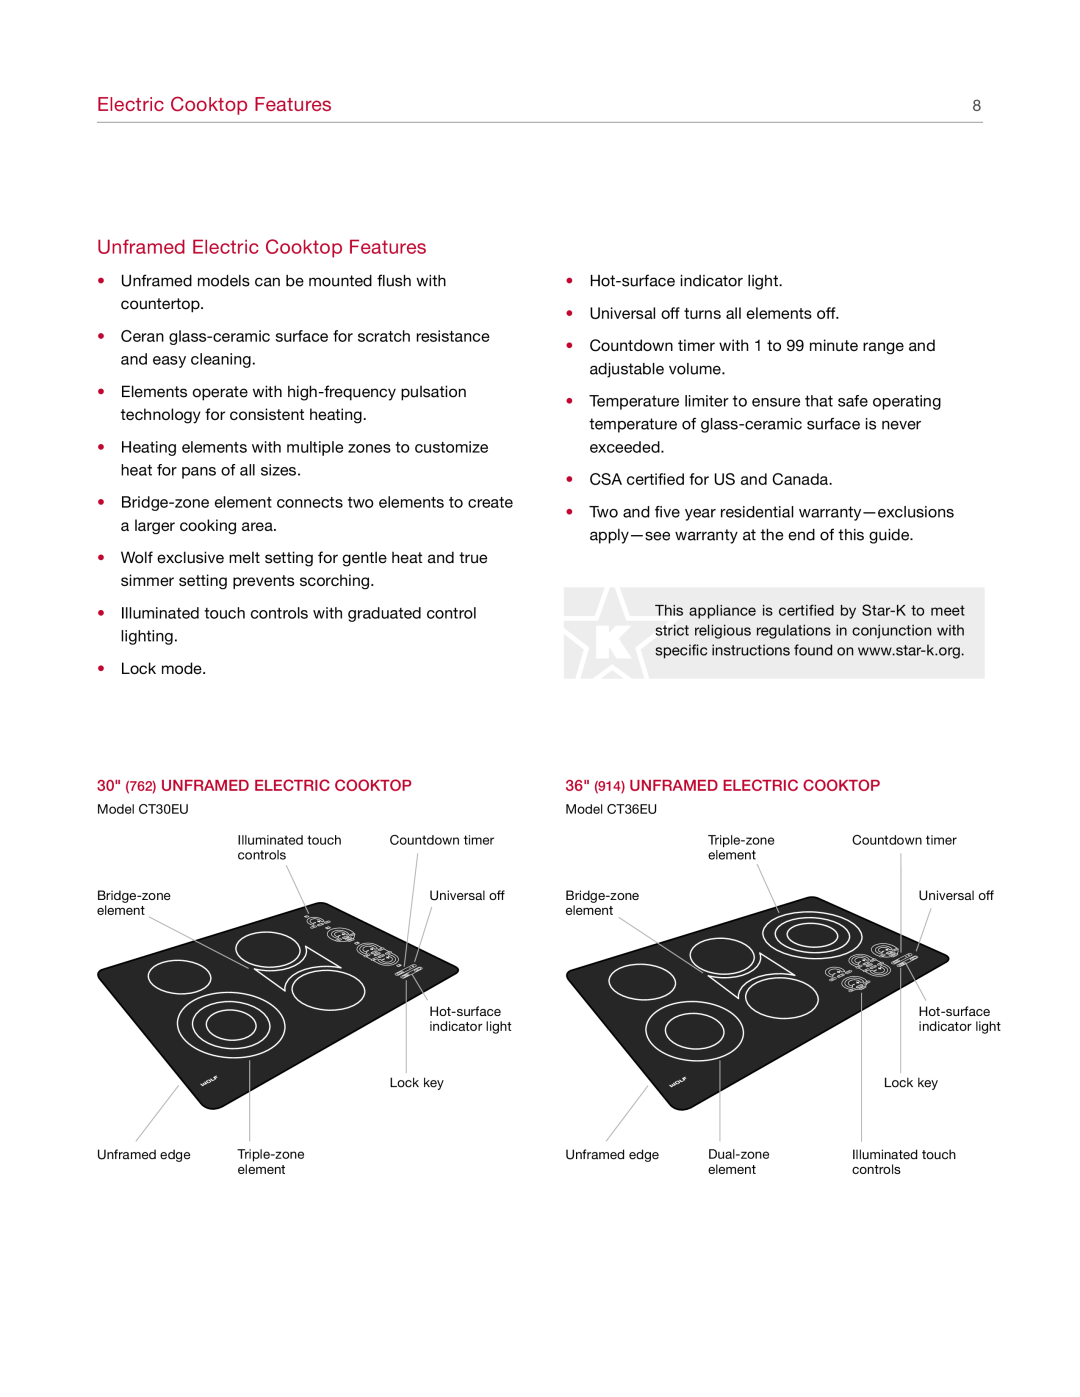 Wolf manual Unframed Electric Cooktop Features, 30 762 UNFRAMED ELECTRIC COOKTOP, 36 914 UNFRAMED ELECTRIC COOKTOP 